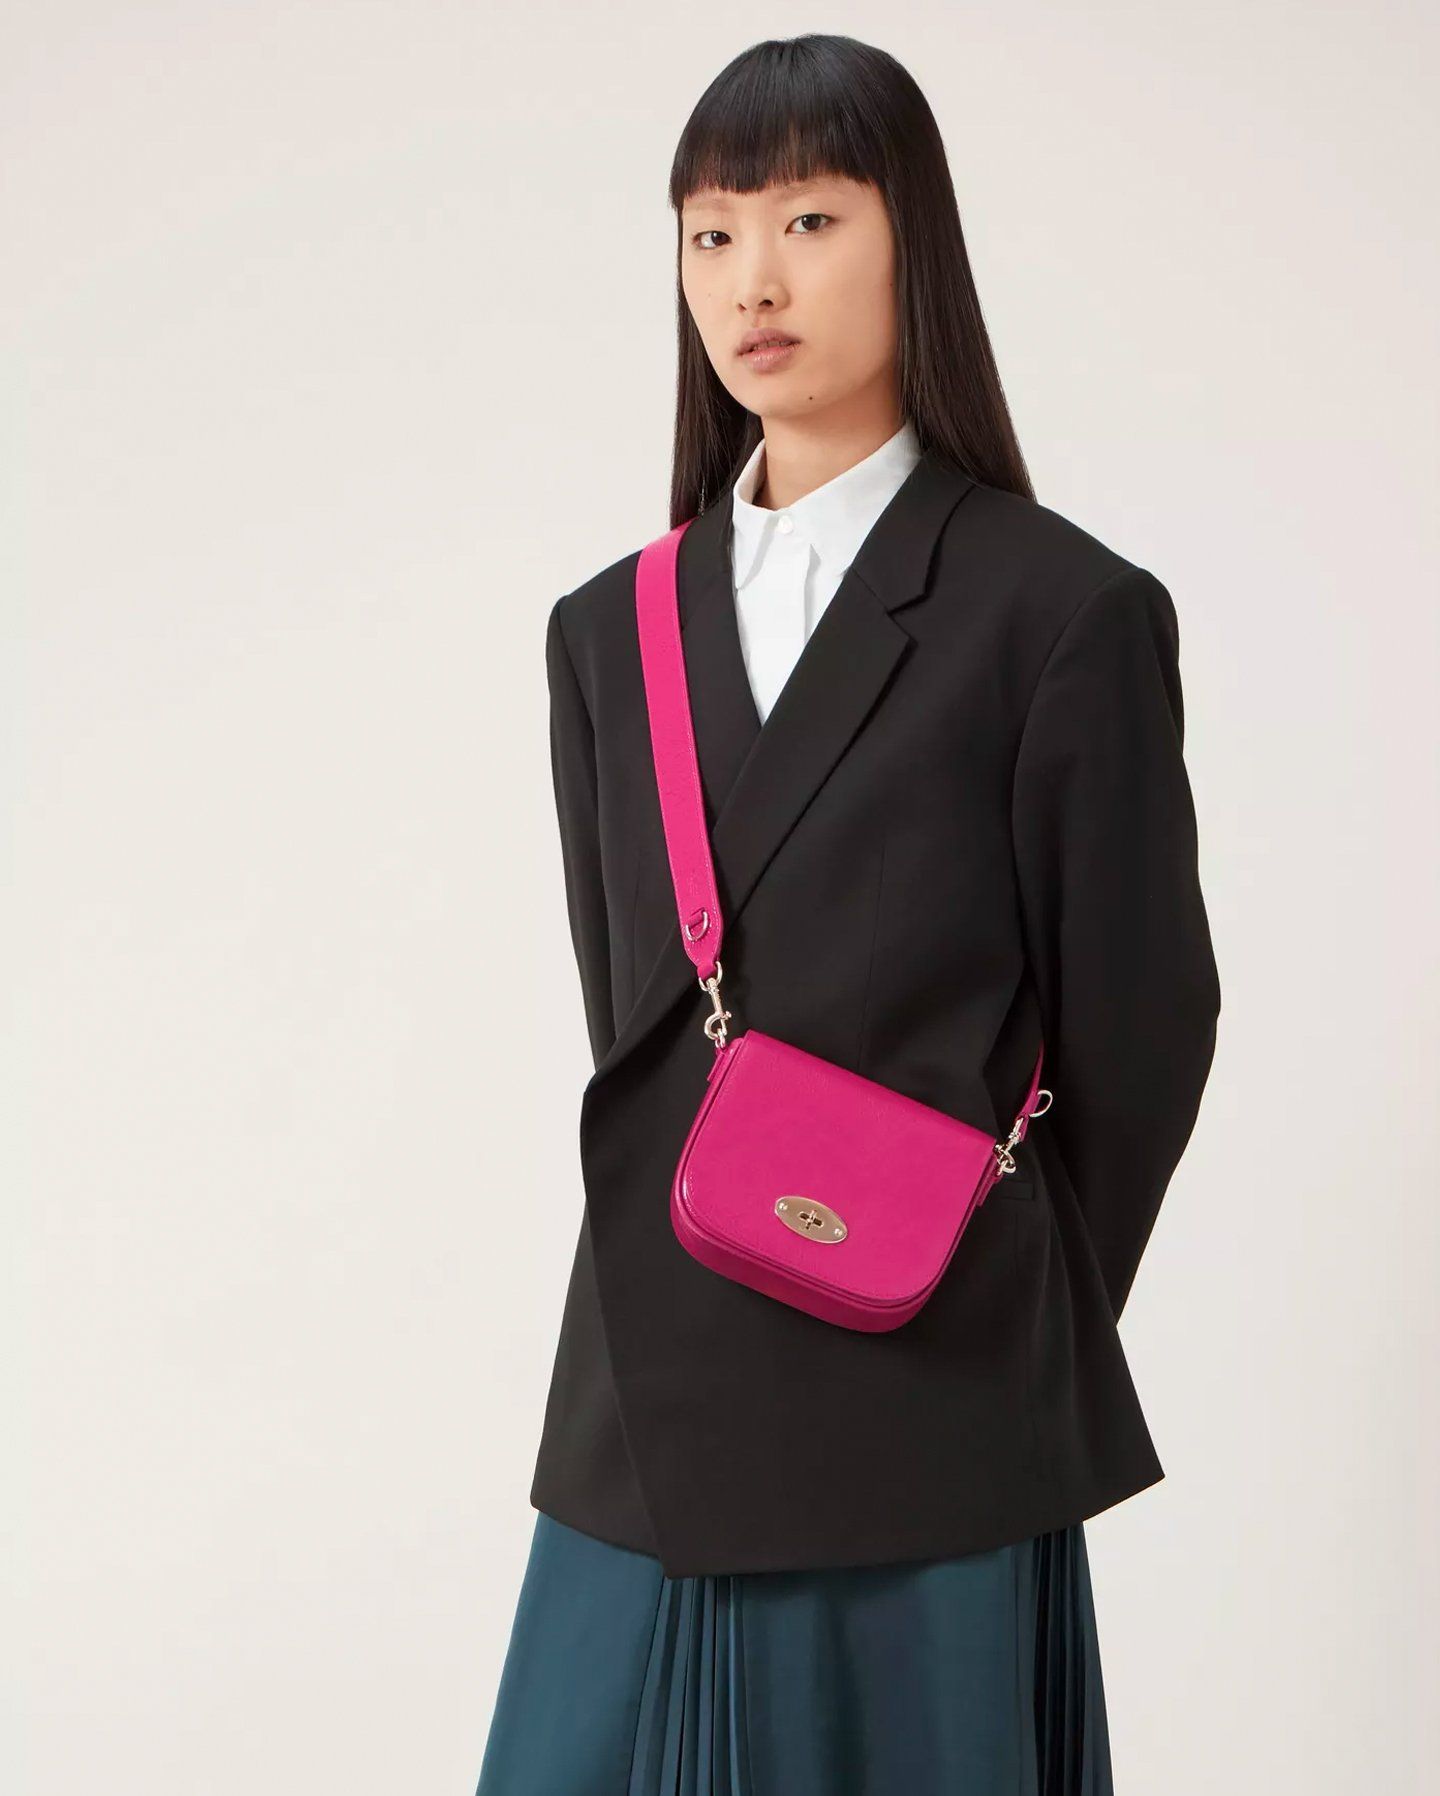 Model wearing Small Darley Satchel in Mulberry Pink Spongy Patent